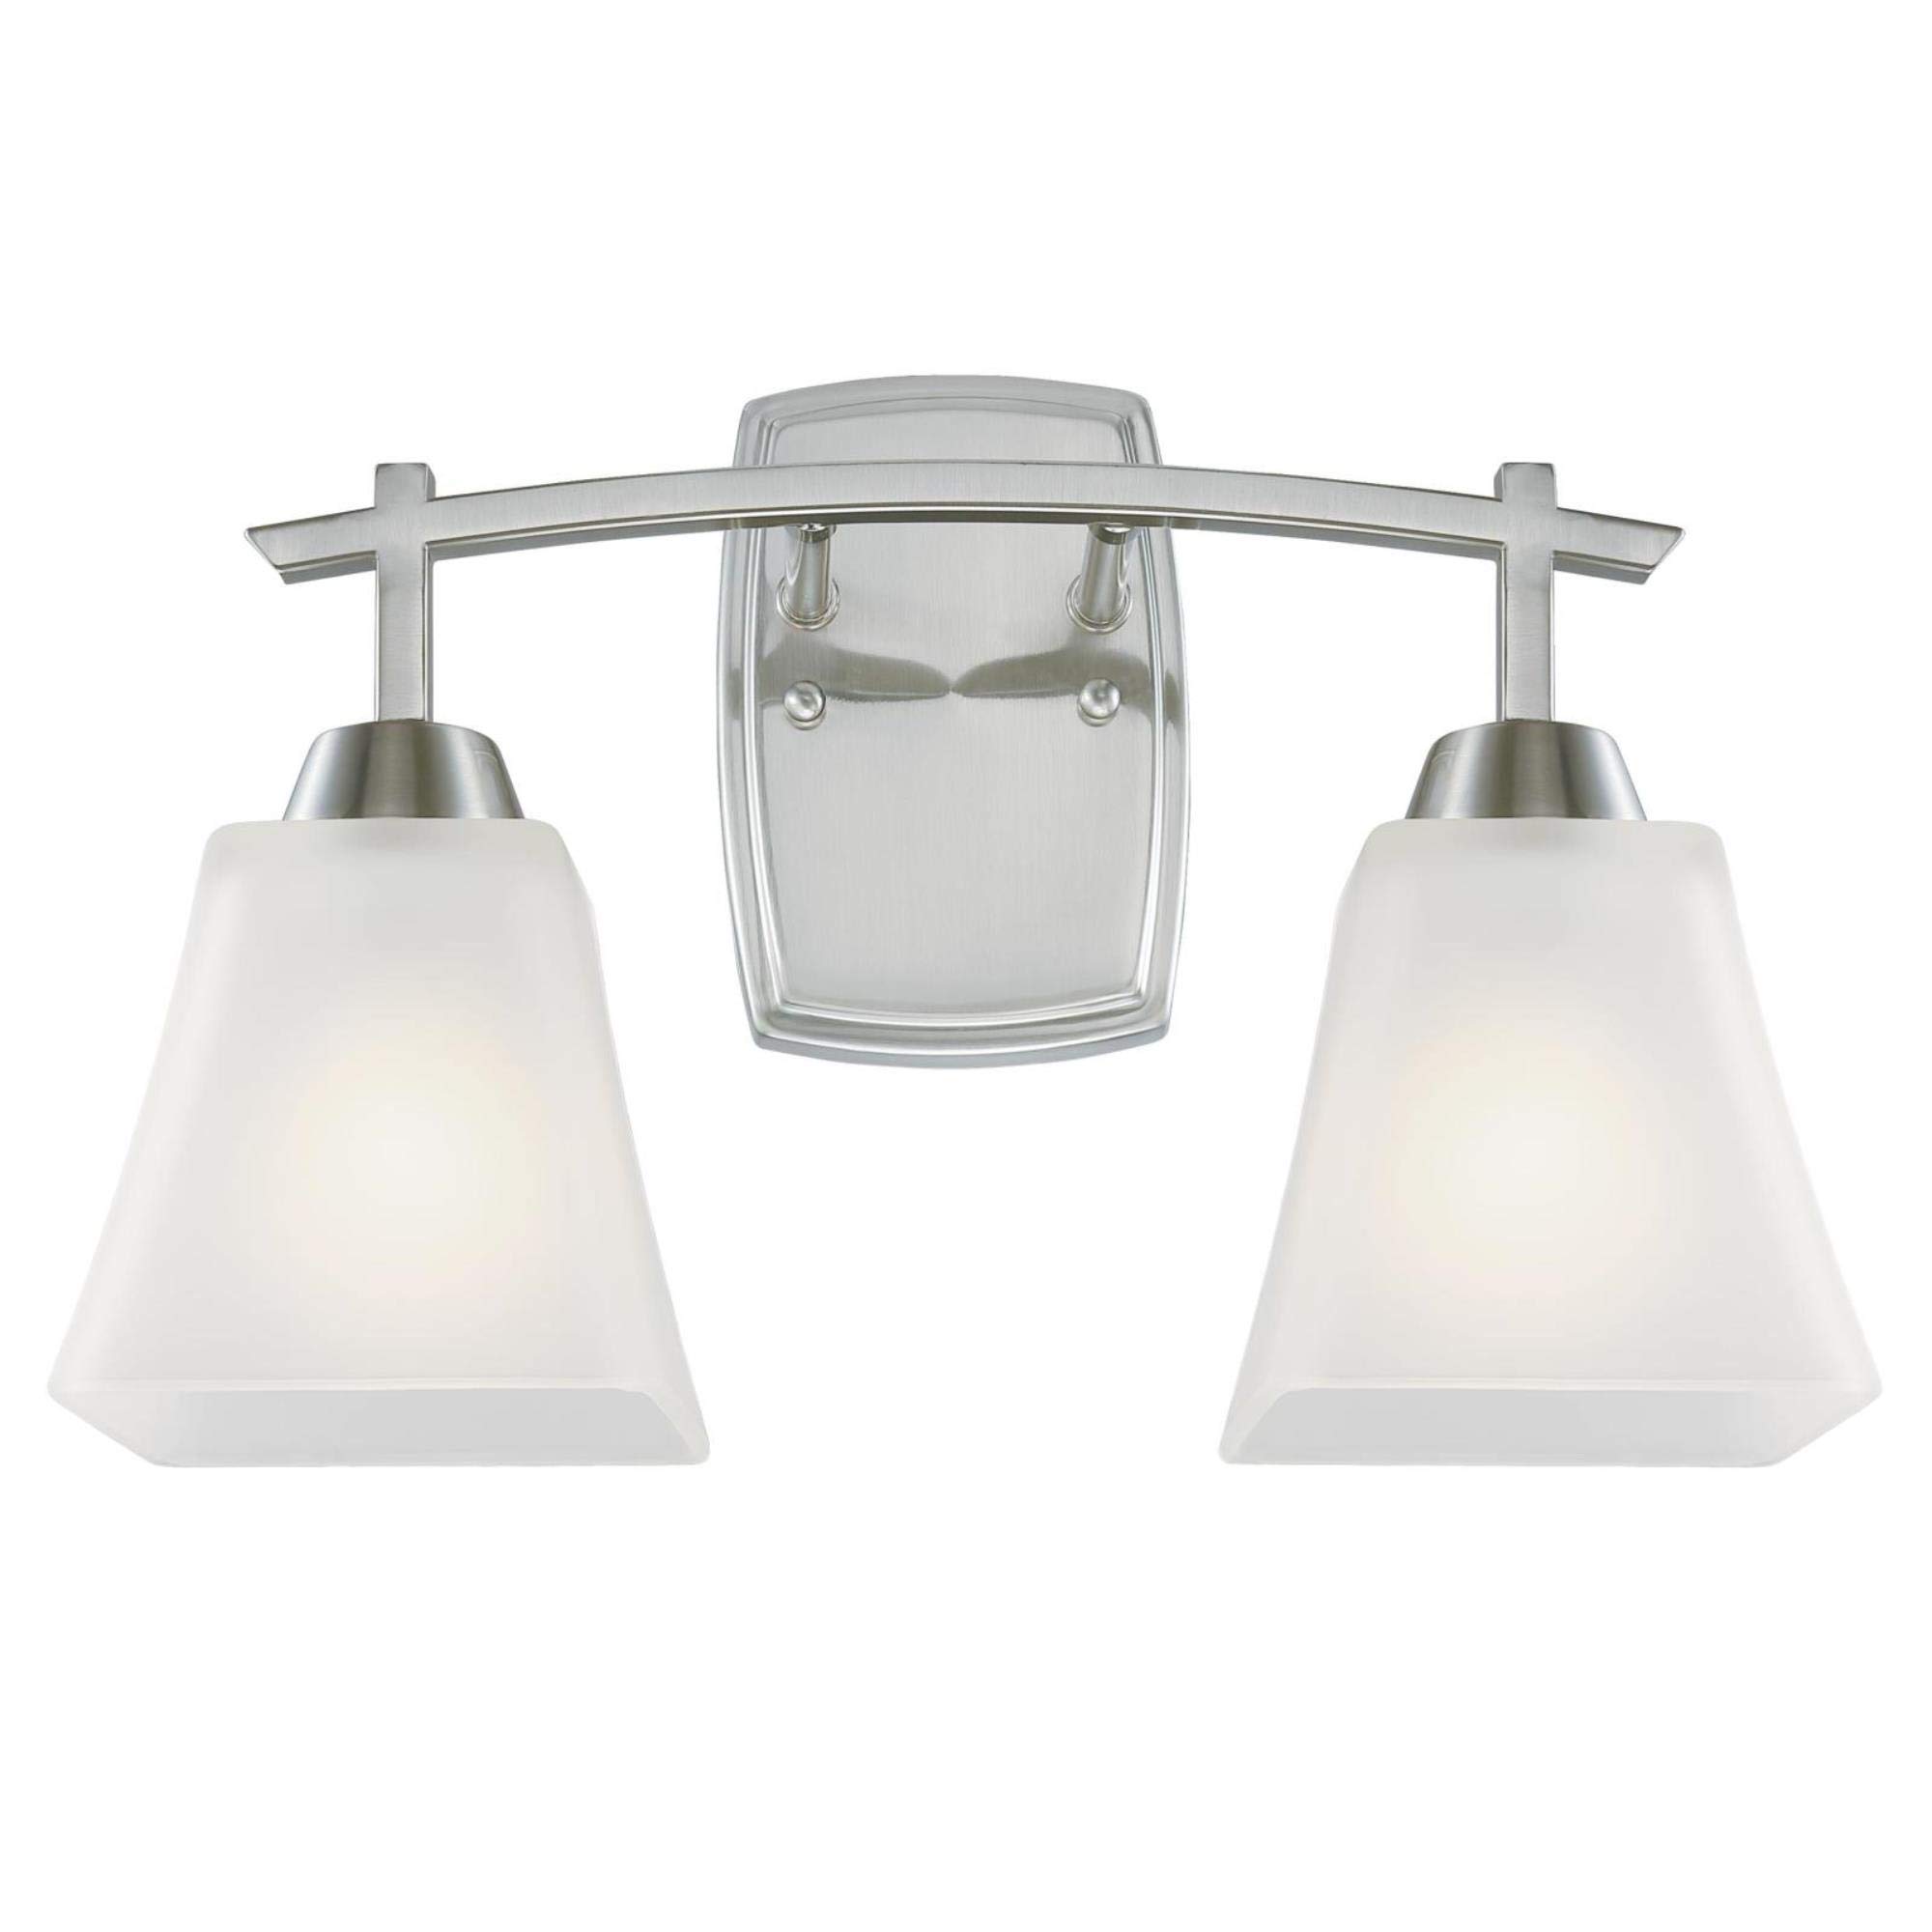 2 Light Wall Fixture Brushed Nickel Finish Frosted Glass